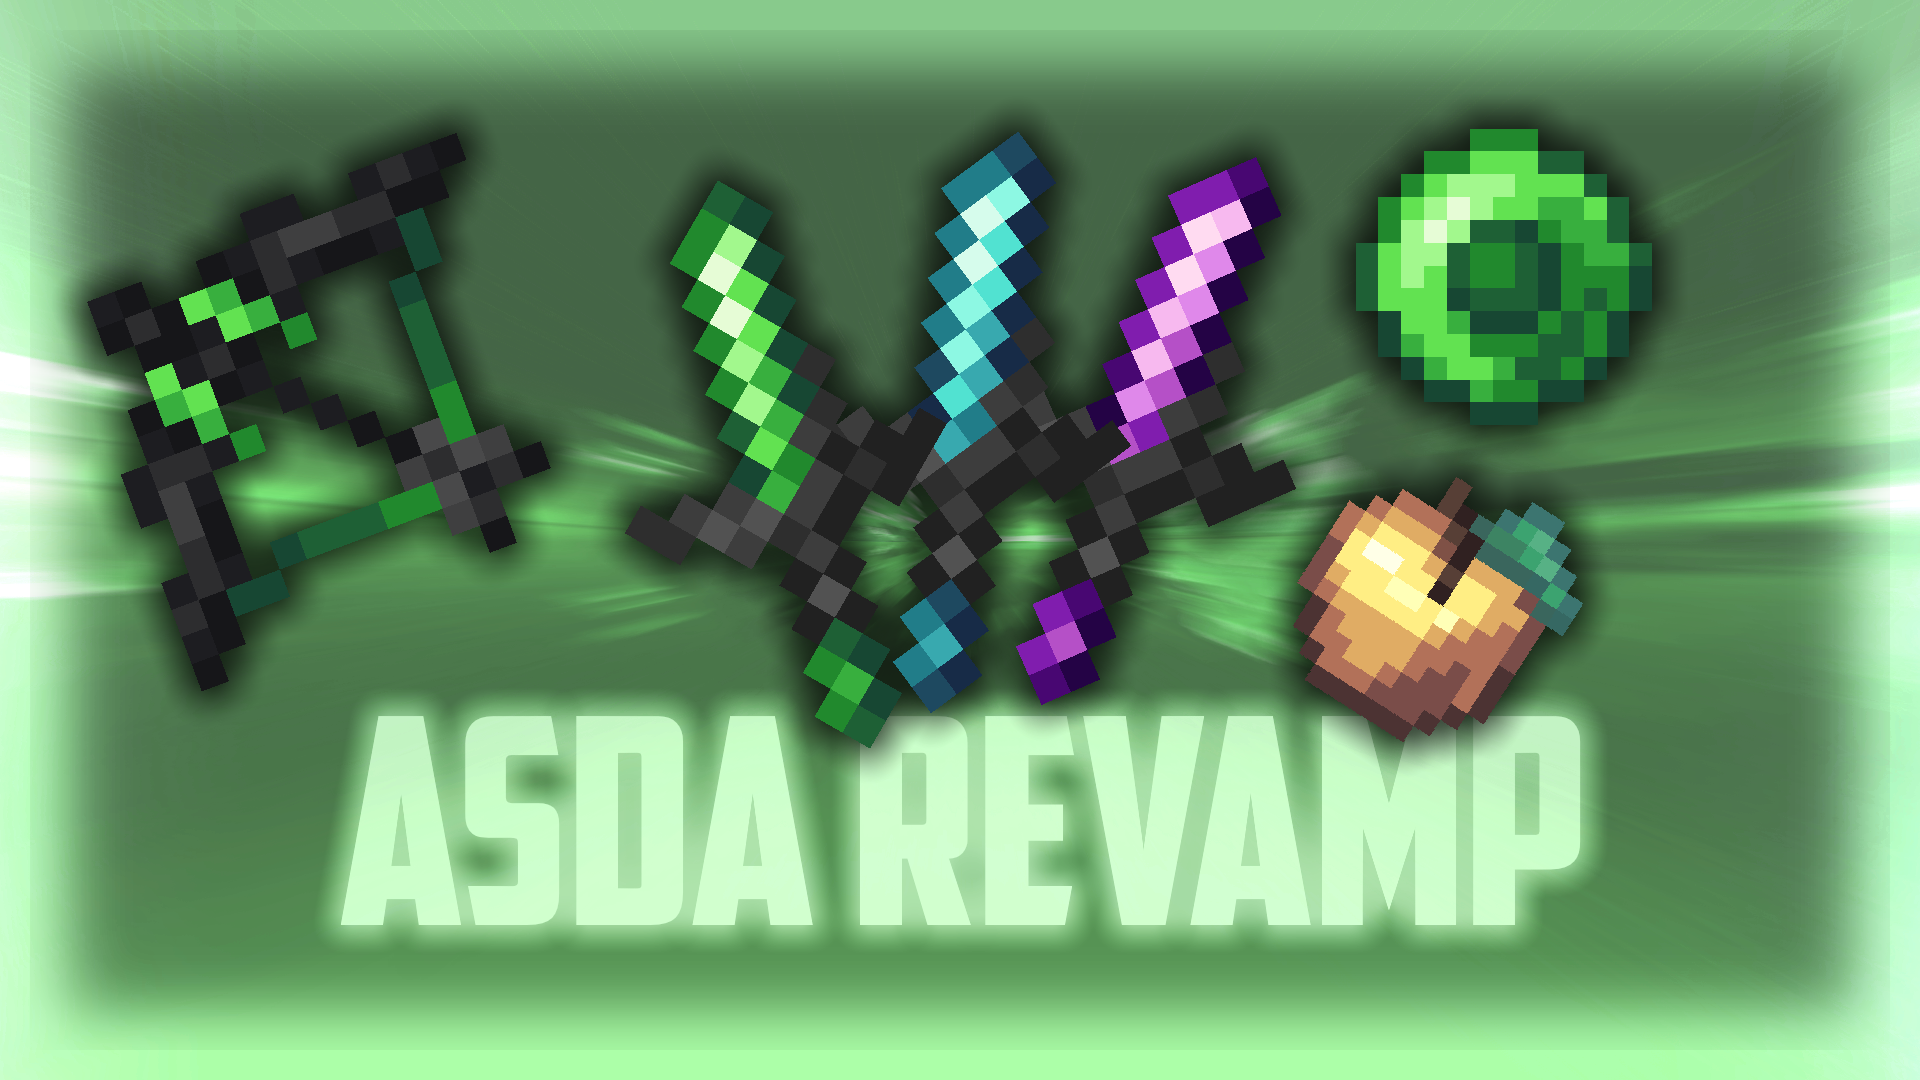 Asda Revamp - Purple recolor 16x by Zlax on PvPRP